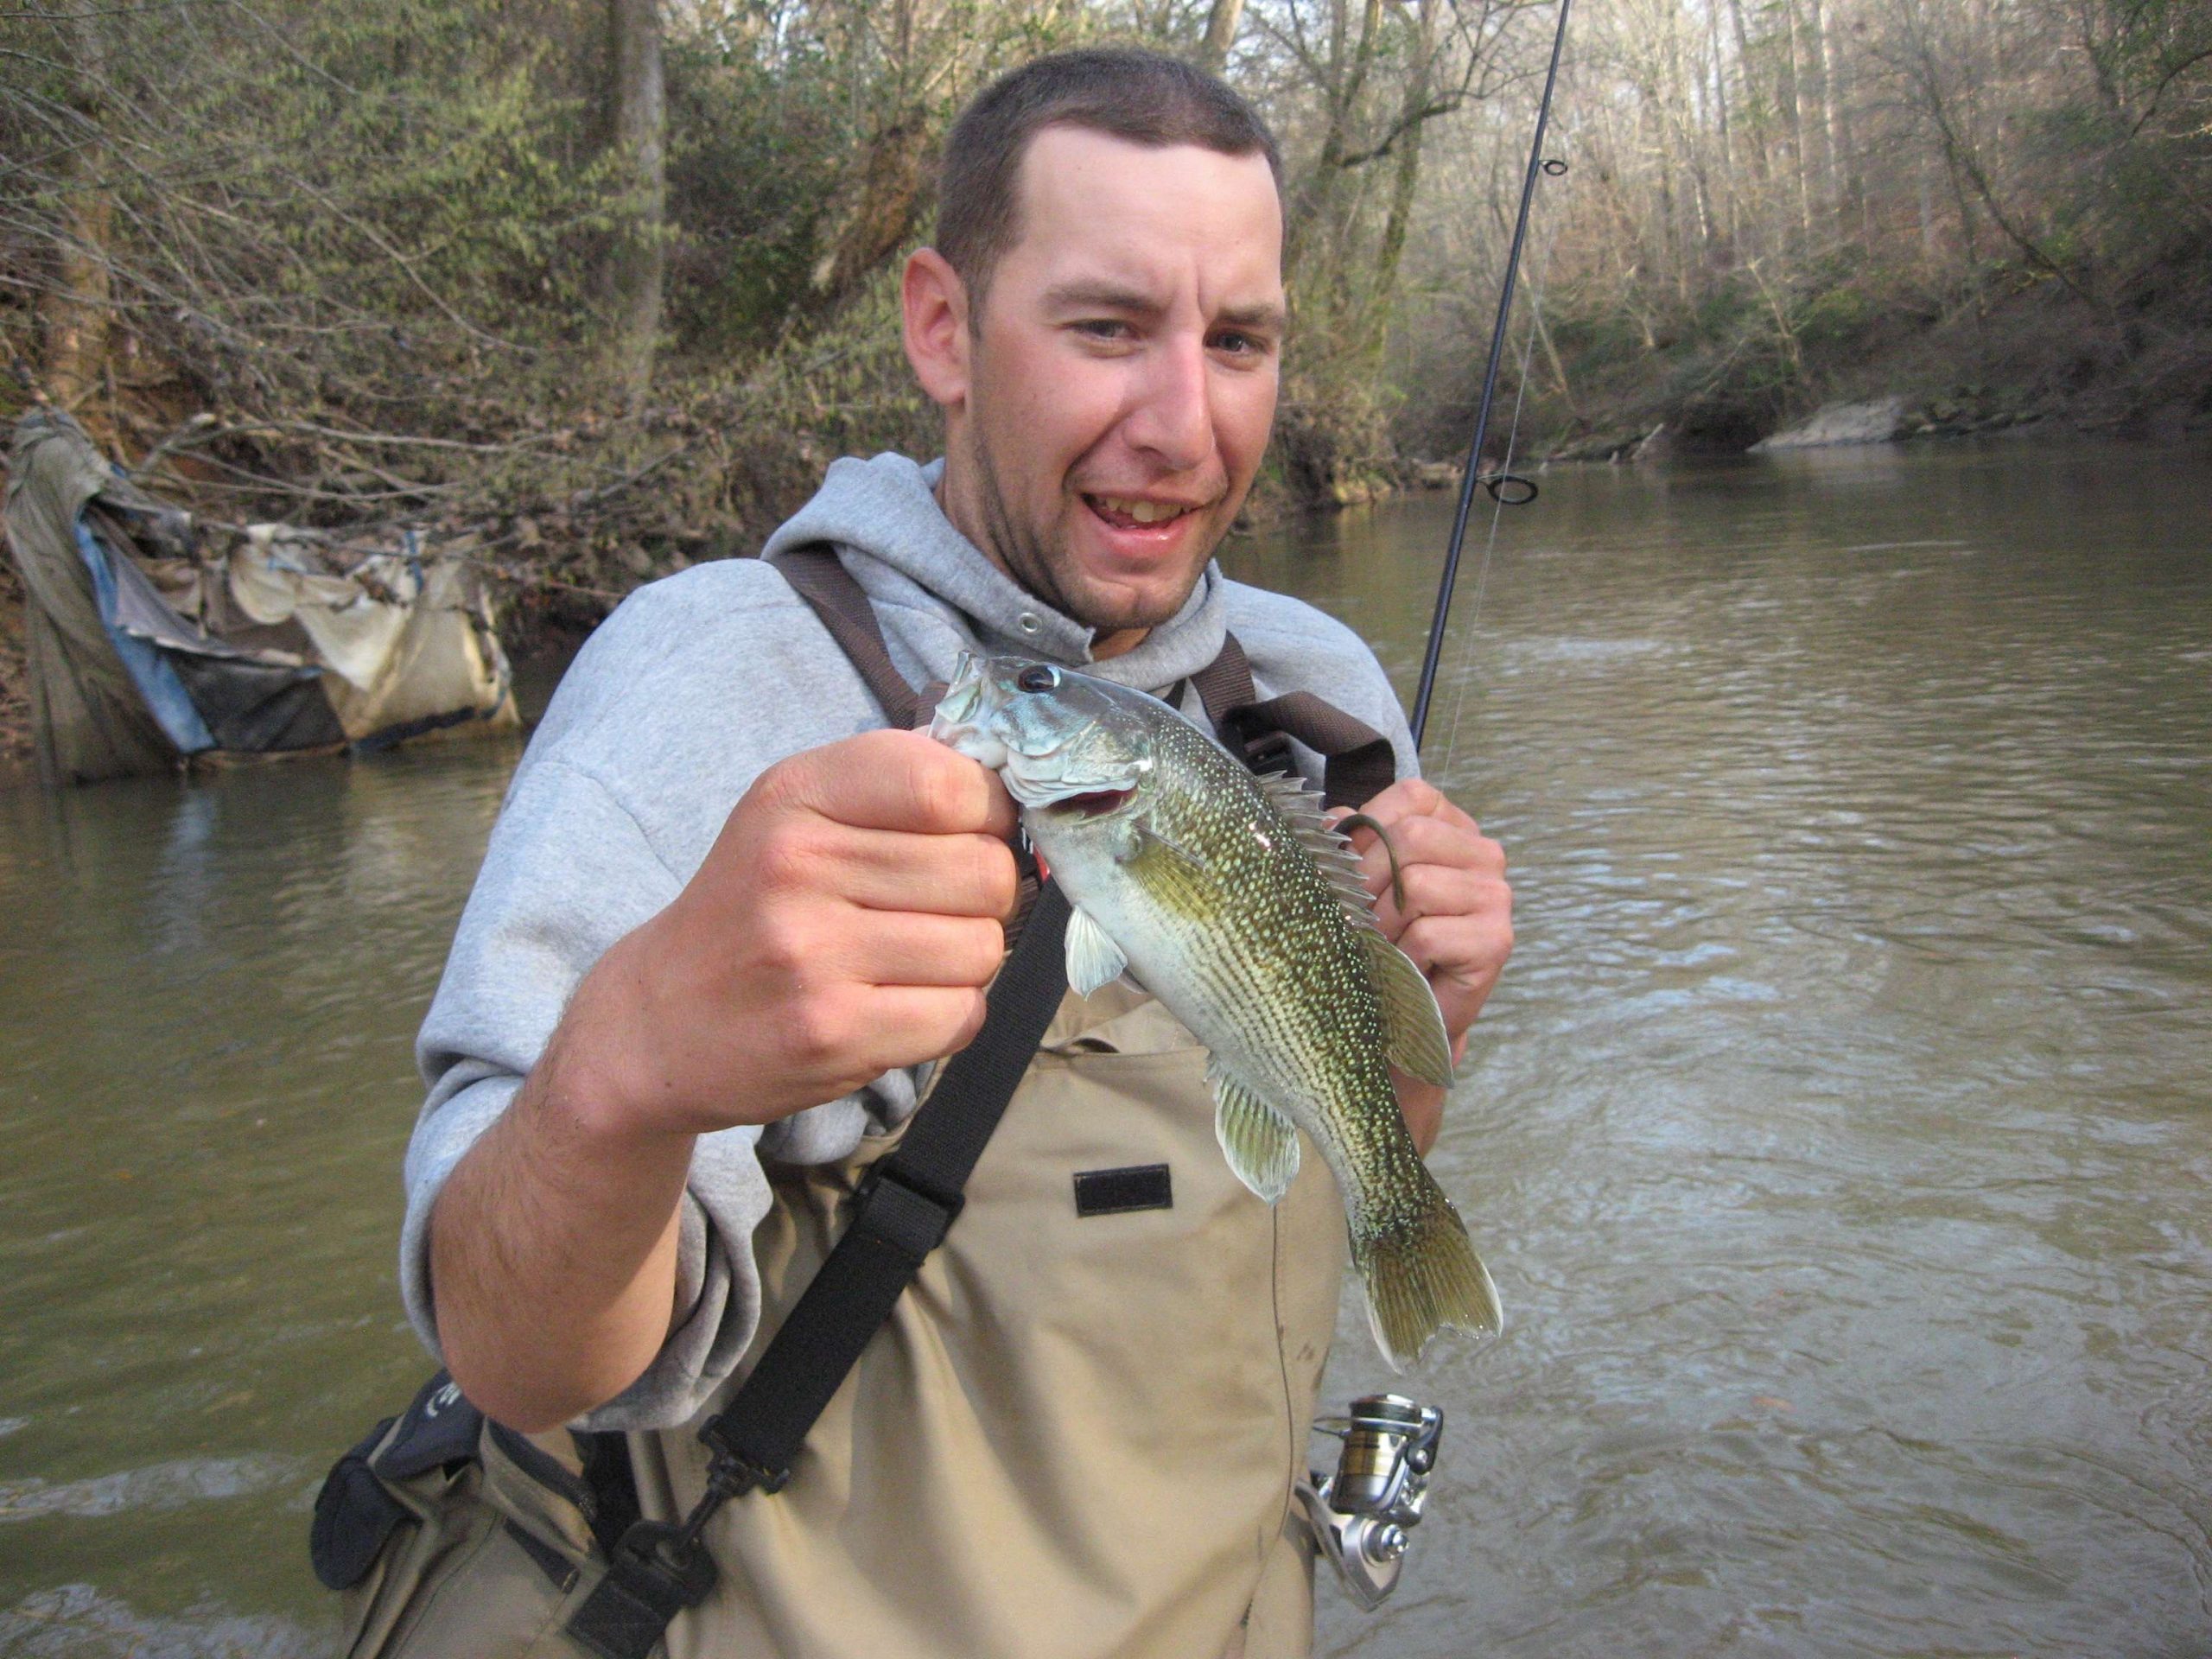 The Tallapoosa redeye came from the Tallapoosa River in Randolph County in Alabama.